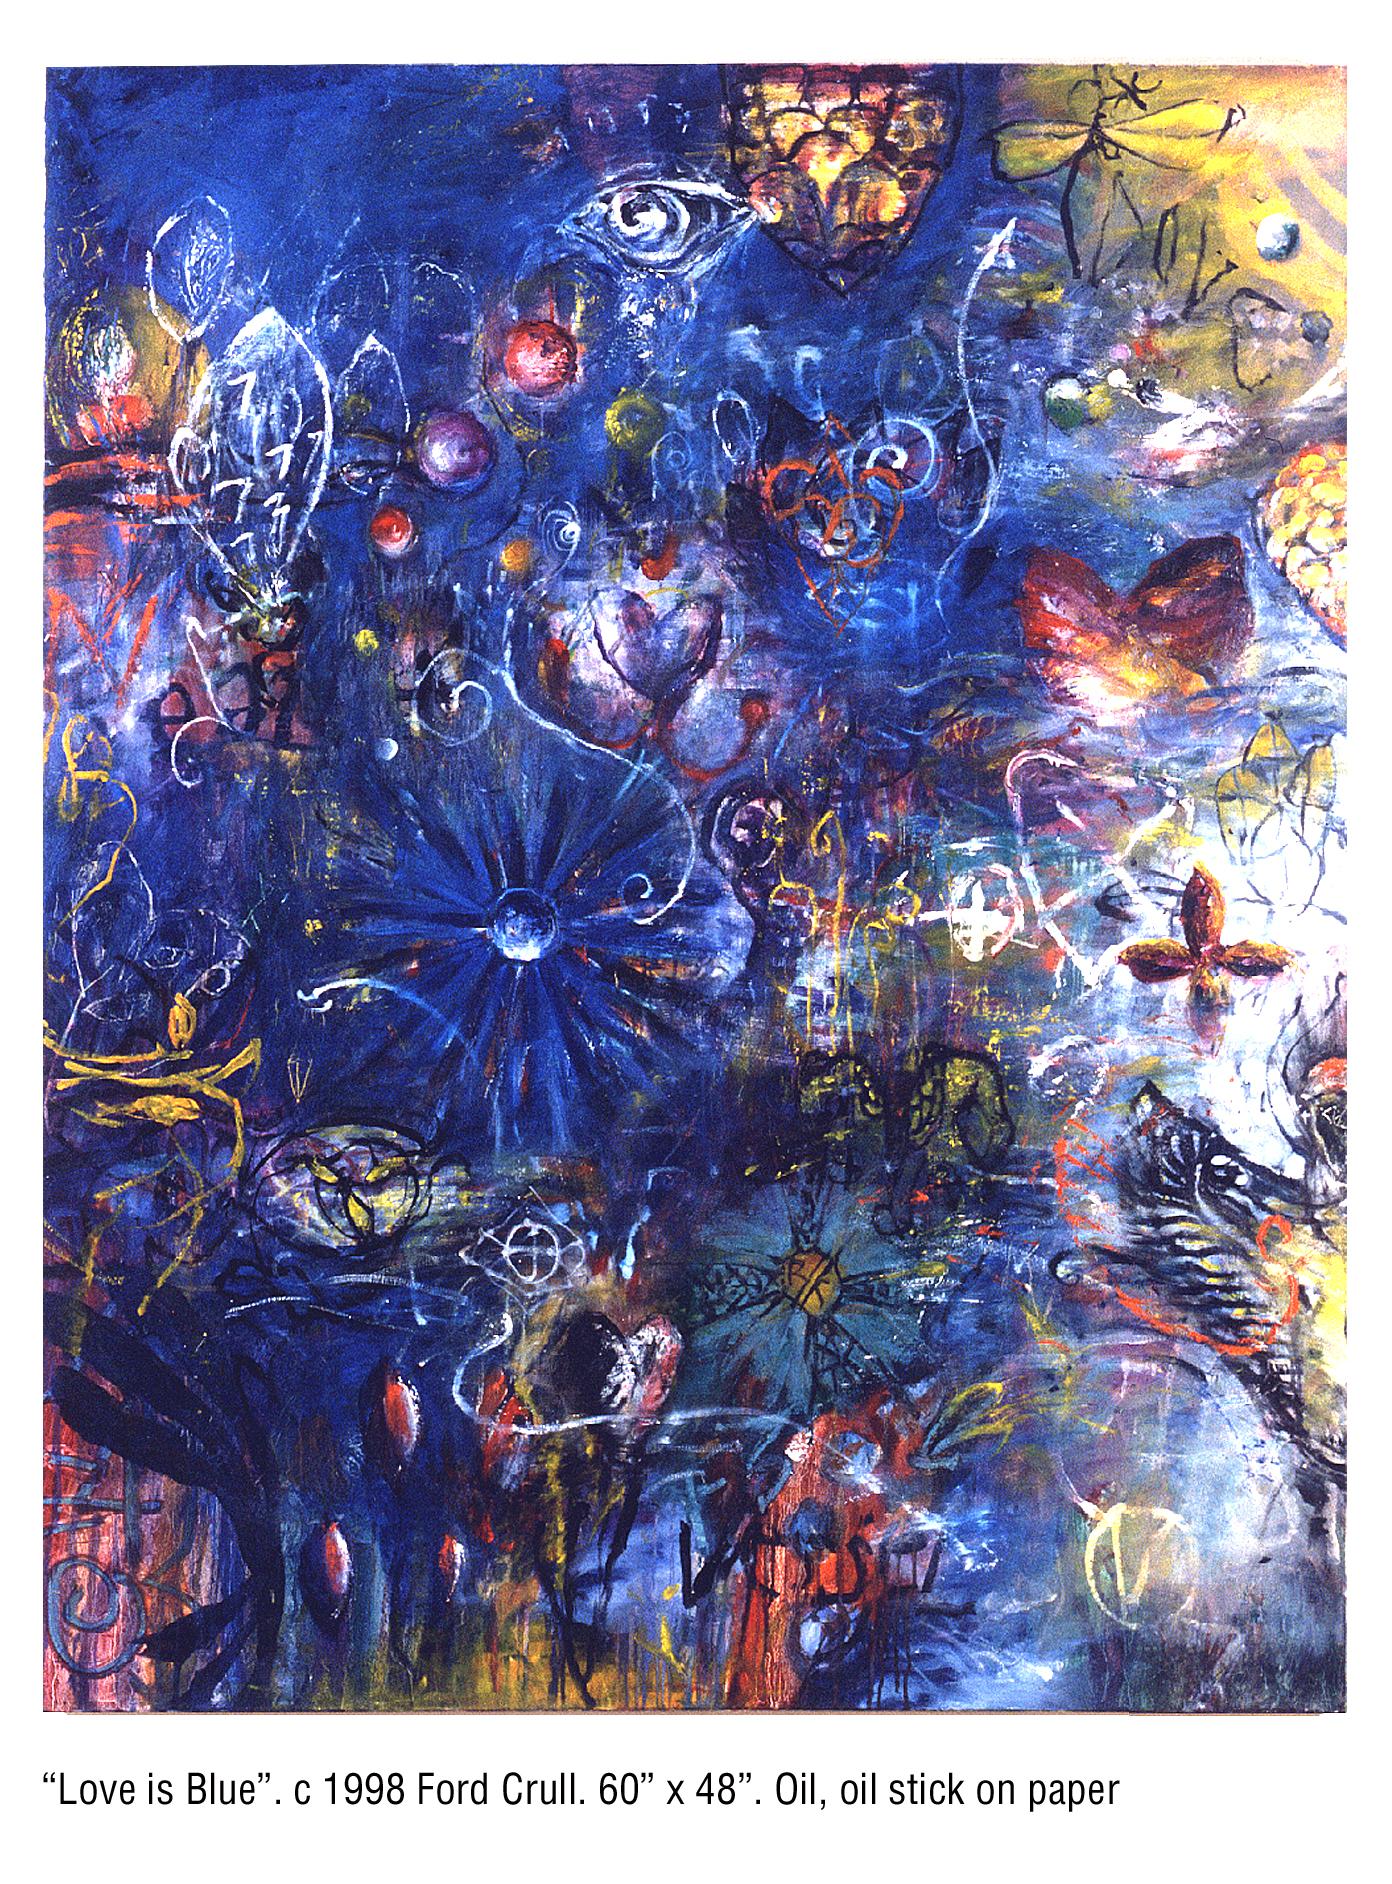 Ford Crull Abstract Painting - LOVE IS BLUE - large blue and yellow abstract painting with symbols 